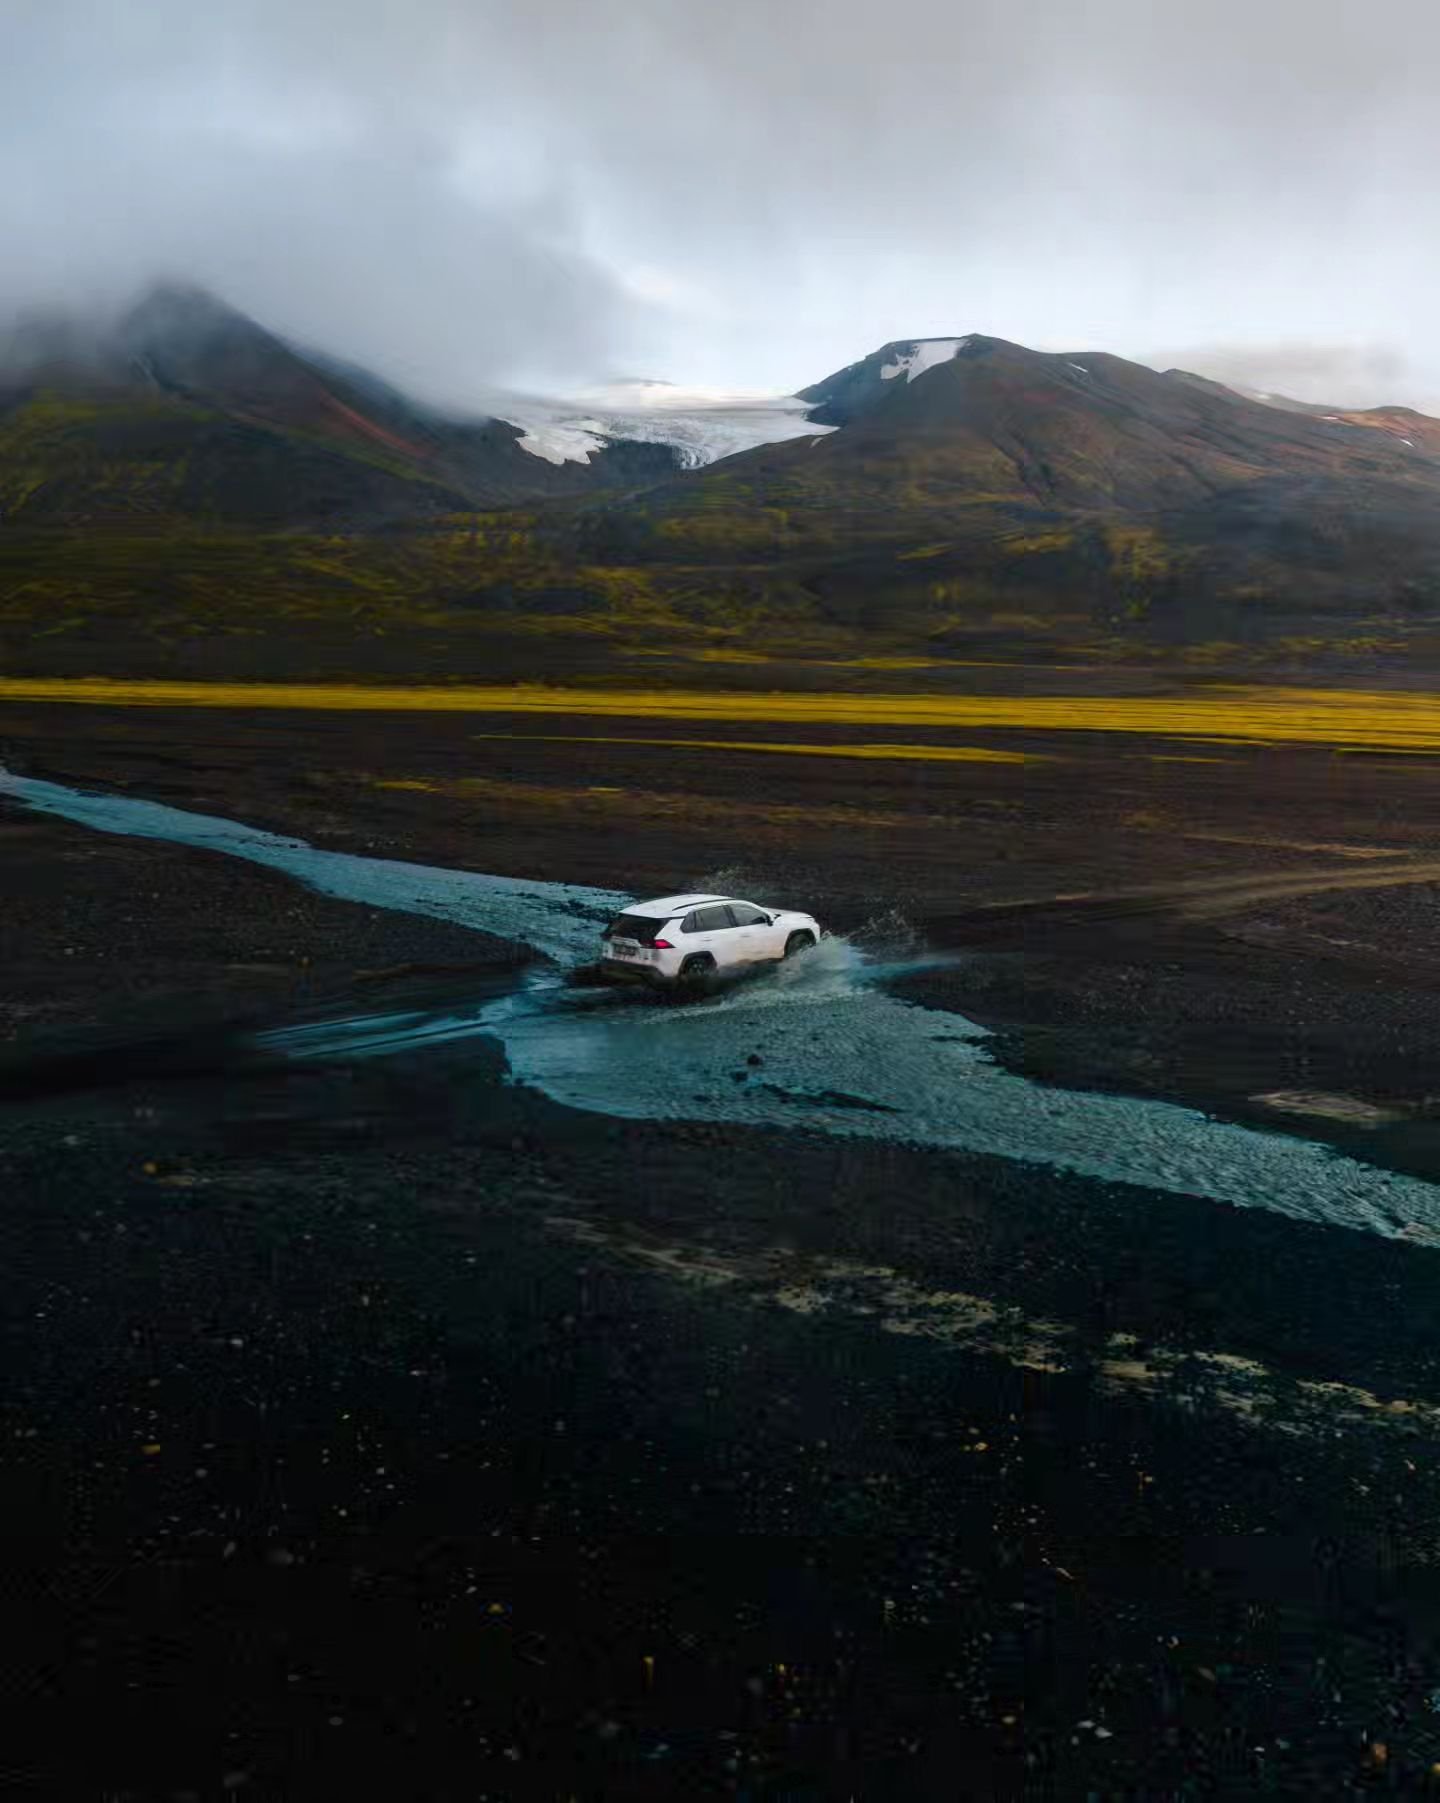 &bull; Crossing rivers in the highlands of Iceland is as fun as it looks 🤭 with @spensersembrat &amp; @sennivisuals⁠
⁠
👉🏻 Everything about Iceland in one place #mitevisuals_iceland 🇮🇸⁠
⁠
🙋🏼&zwj;♂️ Follow @mitevisuals for more⁠
⁠
&bull;⁠
&bull;